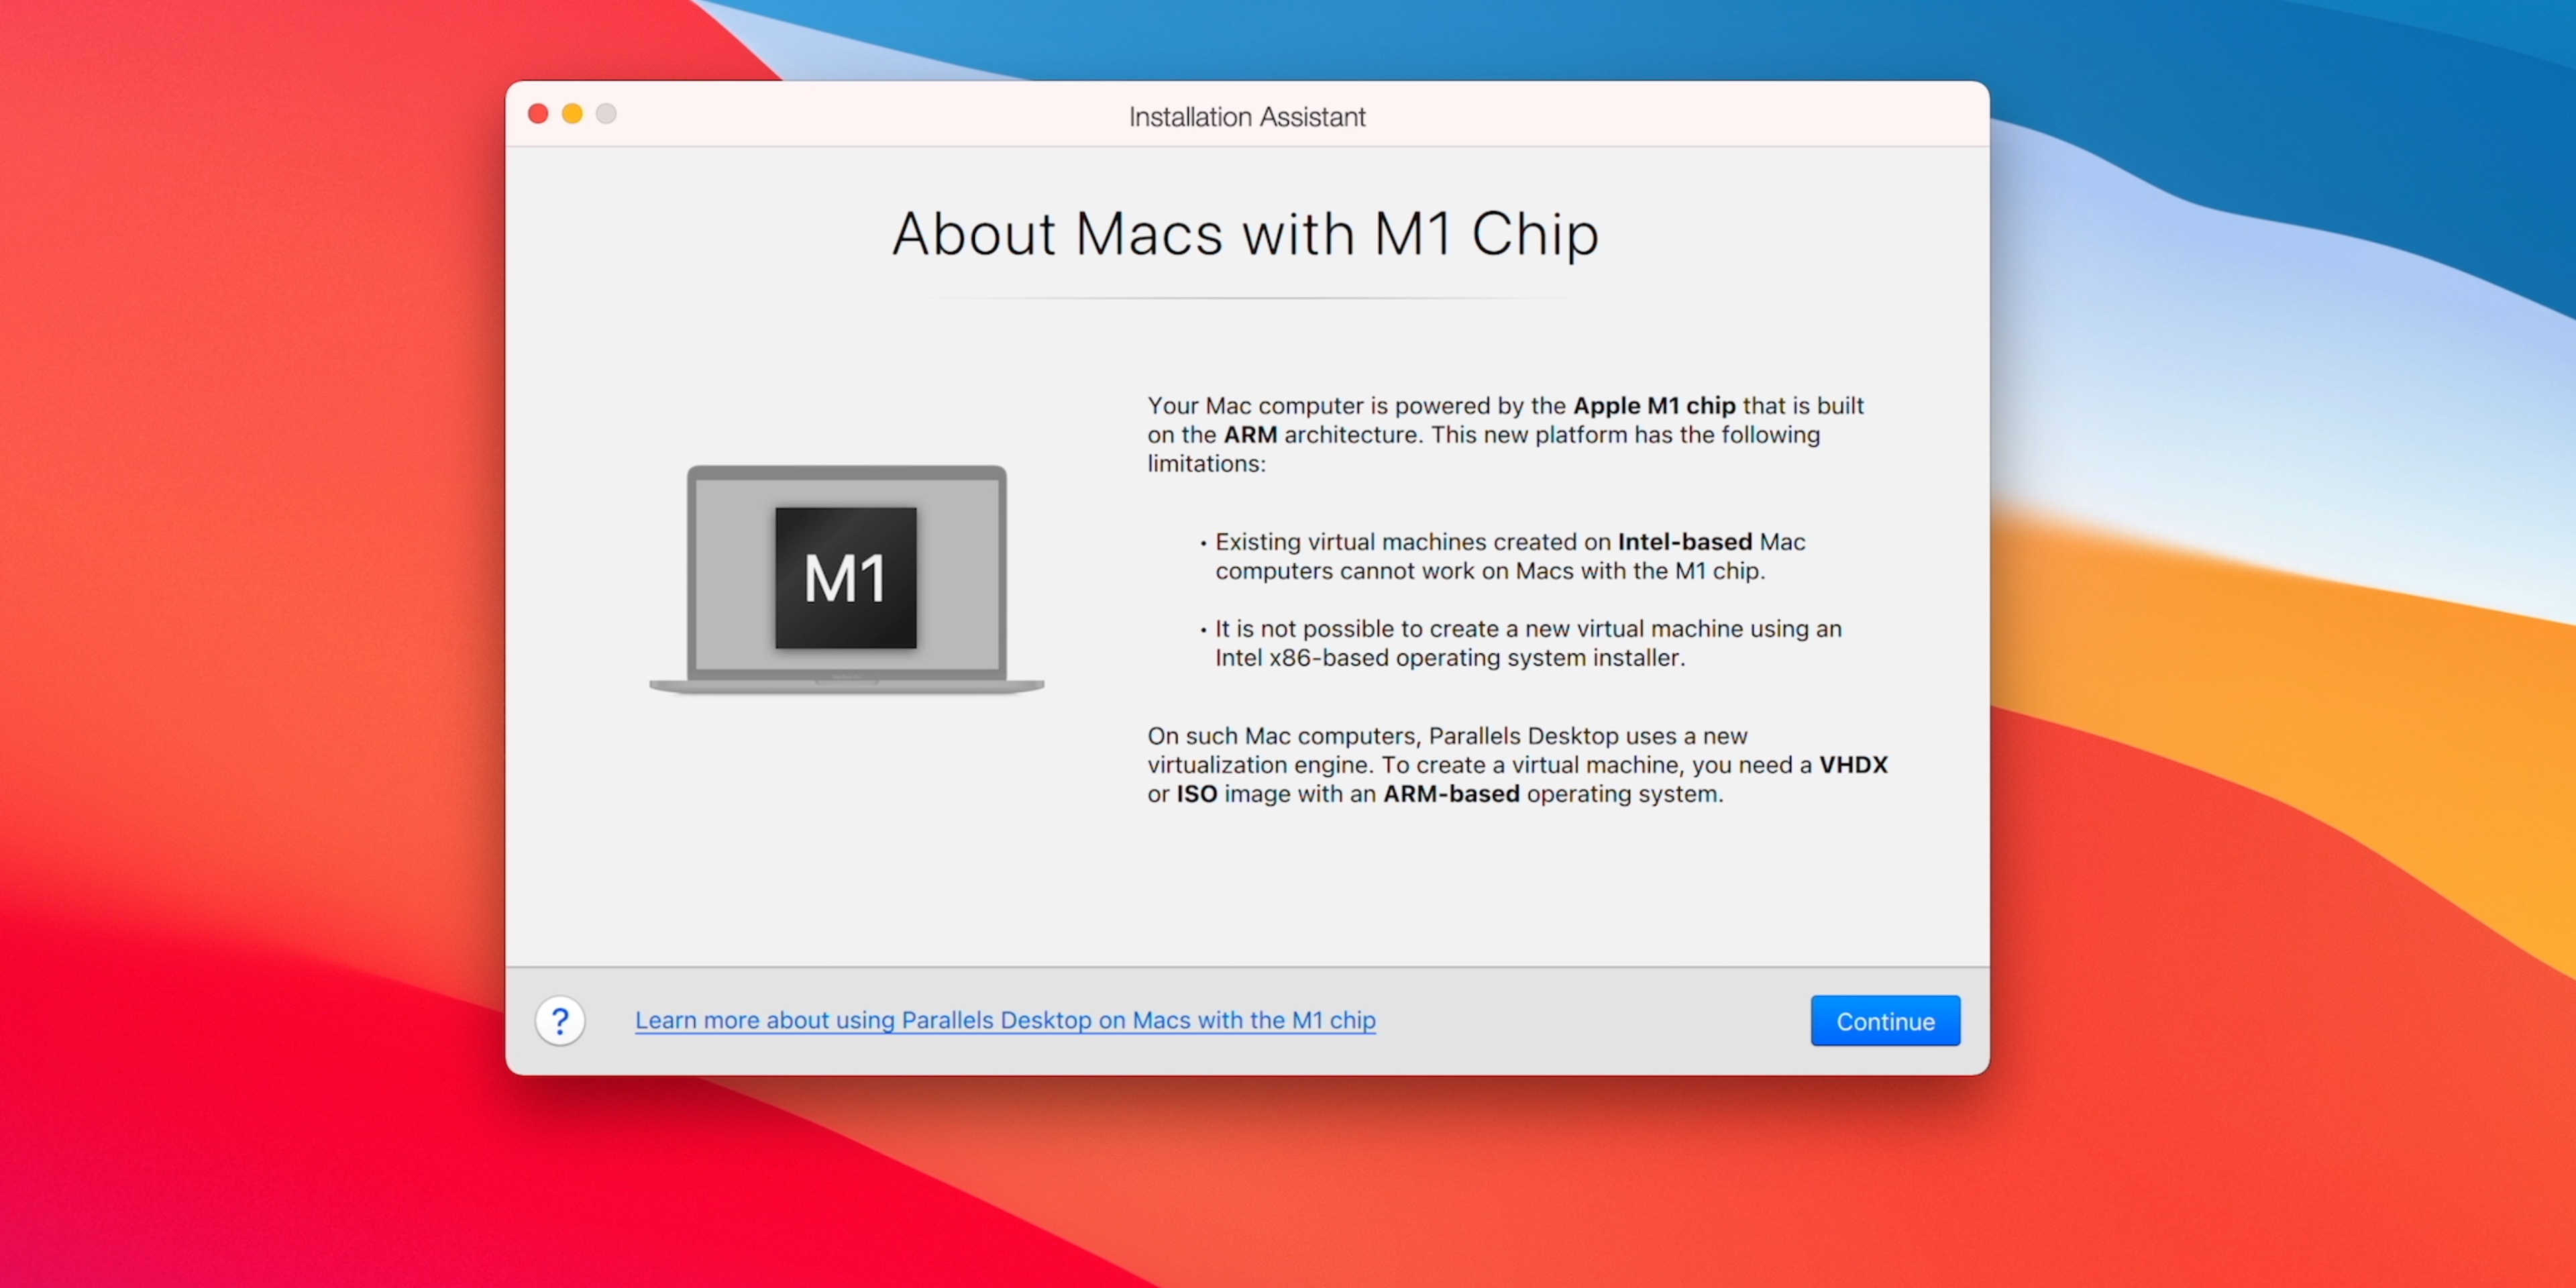 Parallels-About-Macs-with-M1-Chip.jpg?quality=82&strip=all